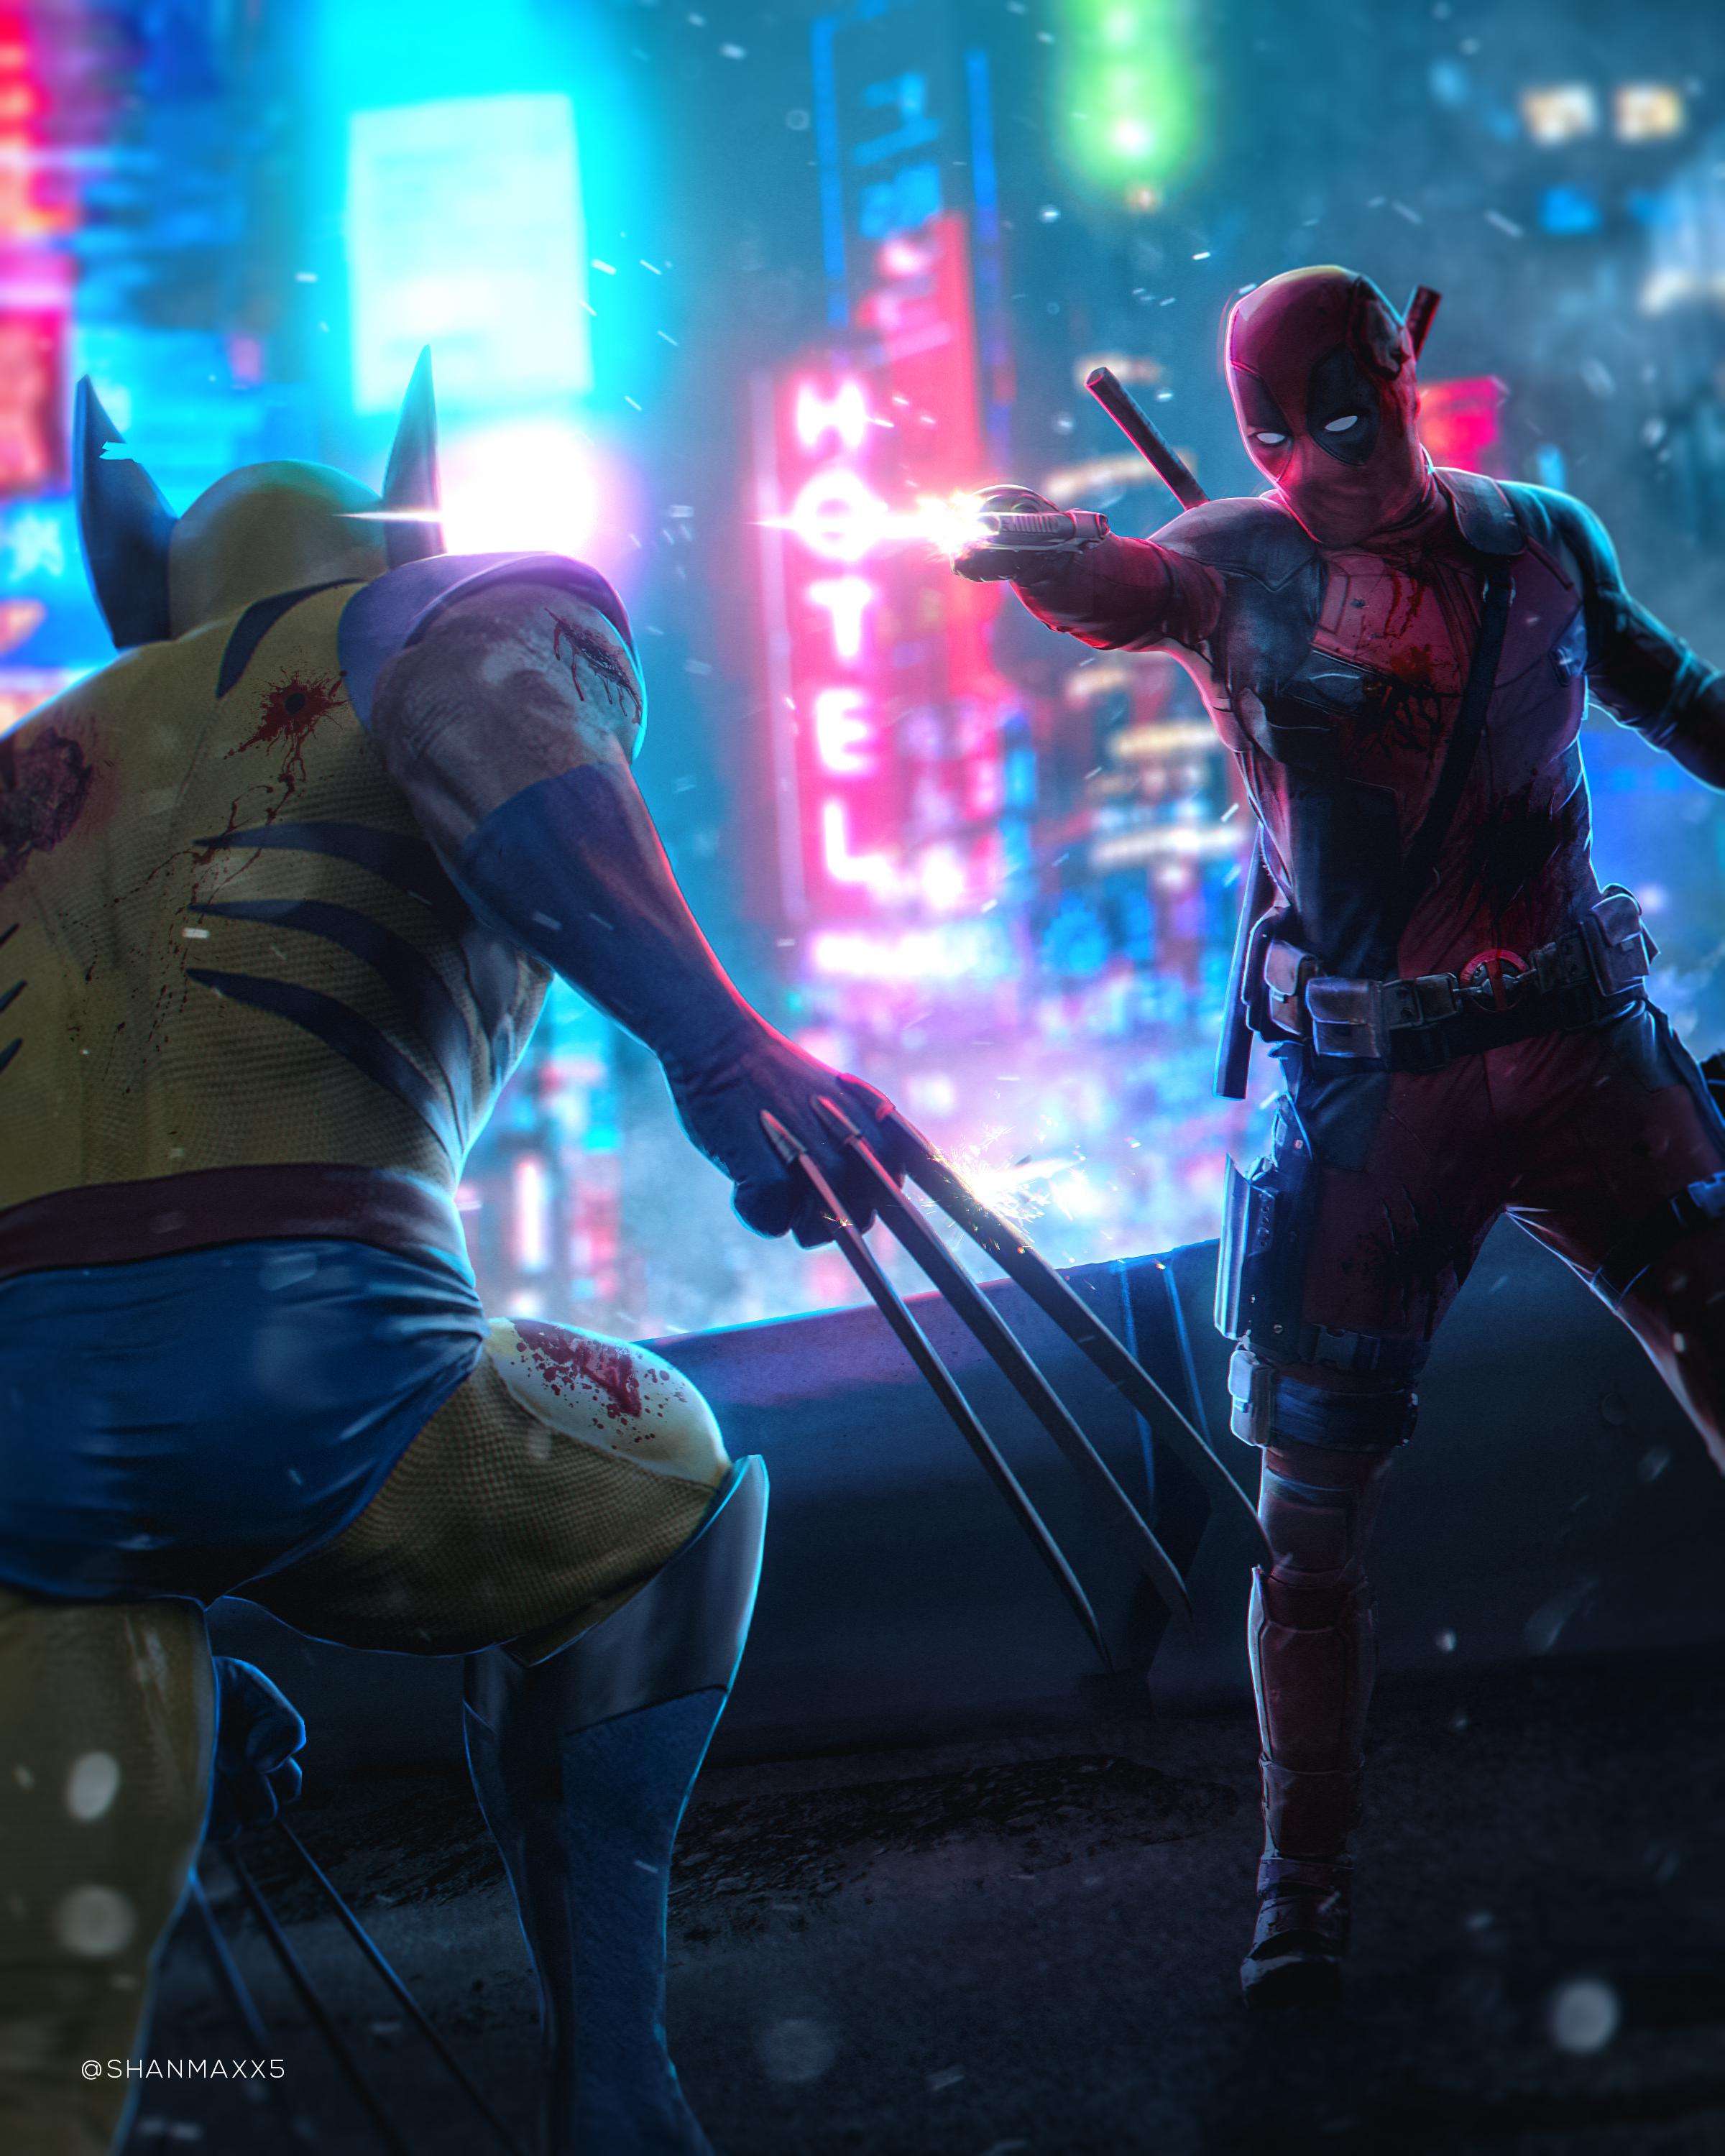  Deadpool & Wolverine Hintergrundbild 2400x3000. Here's My Fanart For Deadpool 3. So Excited To See Our Boys Together On Screen! (And I Hope They Keep Wolverine's Classic Suit Or A More Screen Appropriate Version Of It)